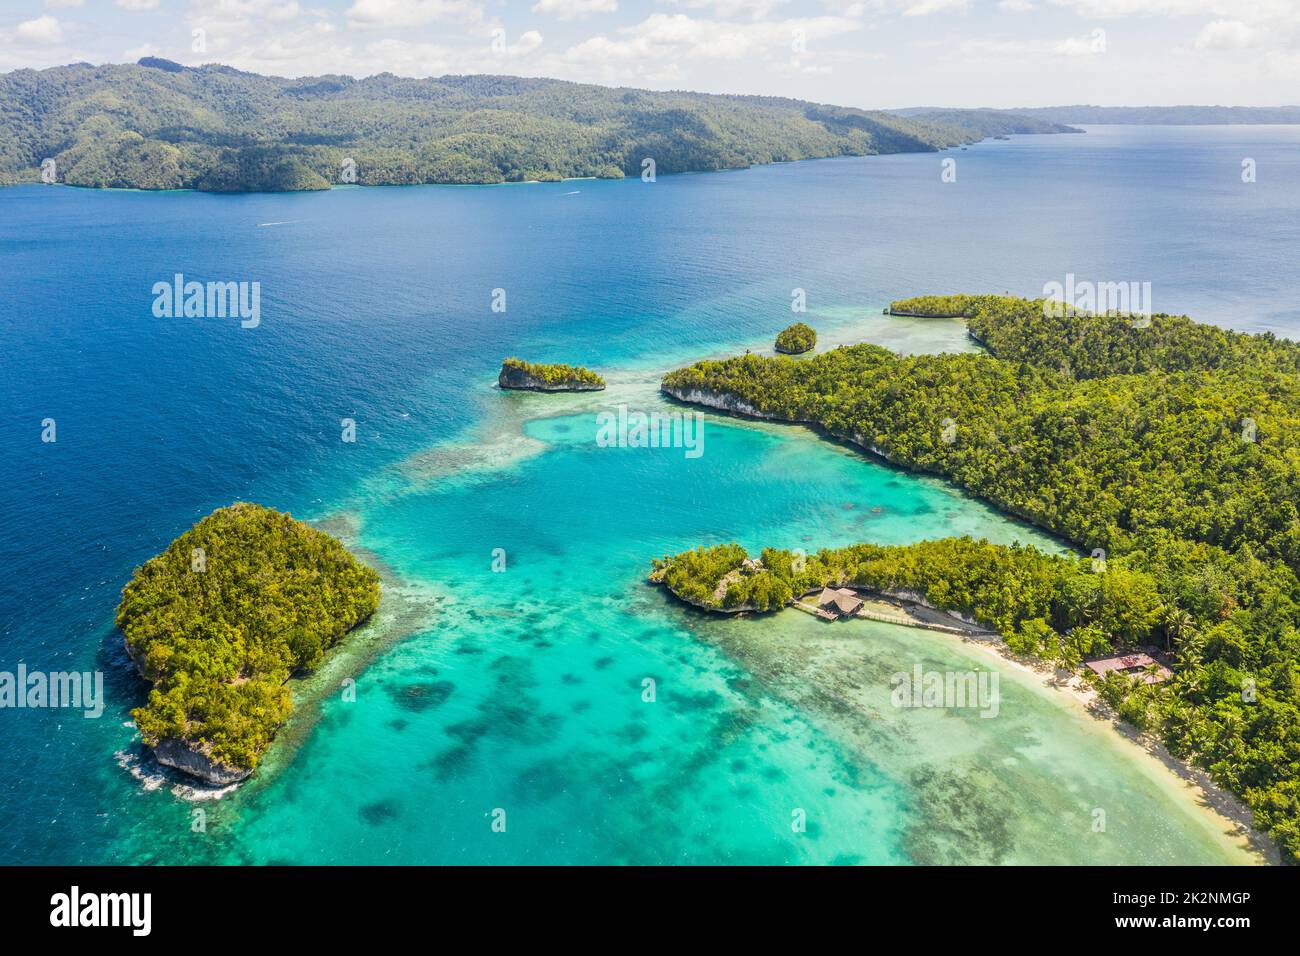 A most beautiful island. High angle shot of the Raja Ampat Islands surrounded by the Indo-Pacific Ocean. Stock Photo